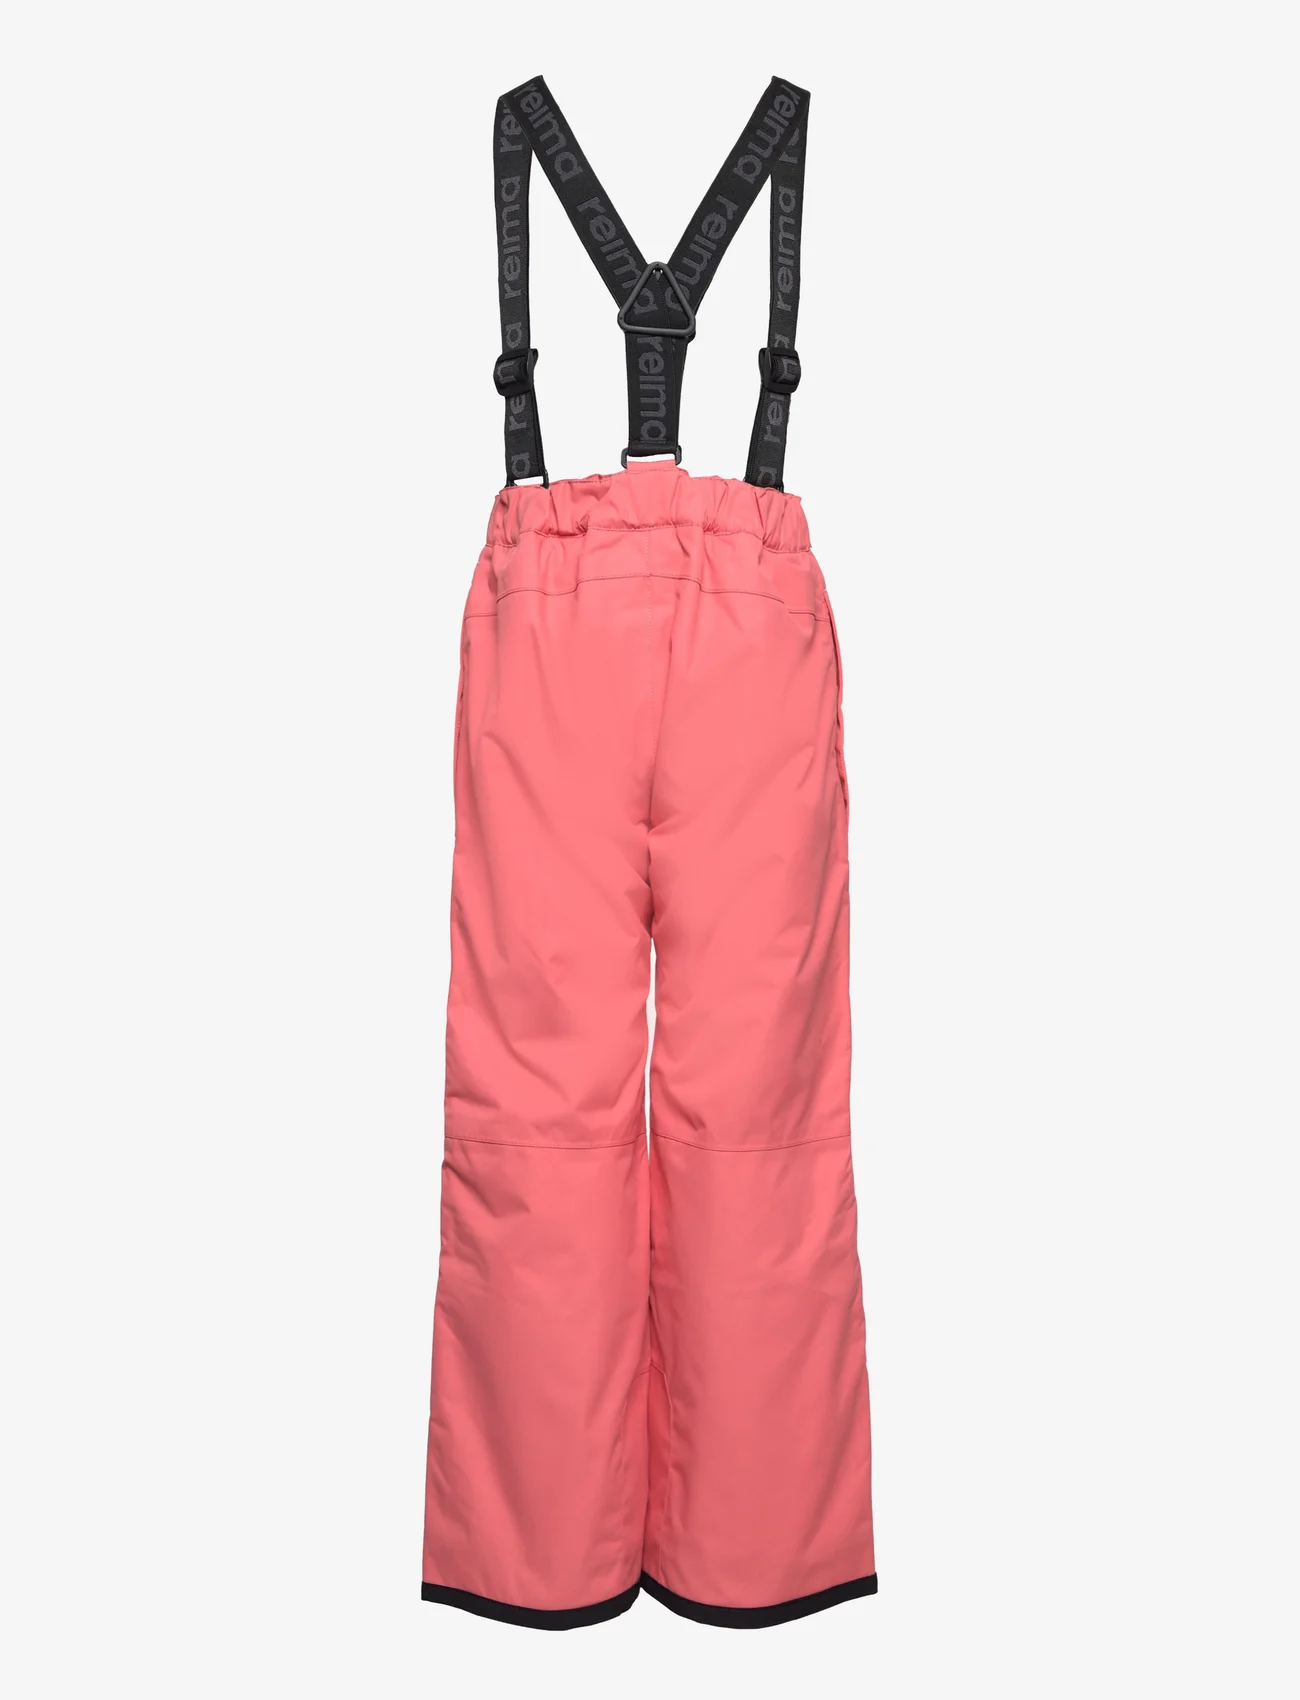 Reima - Kids' winter trousers Proxima - underdeler - pink coral - 1